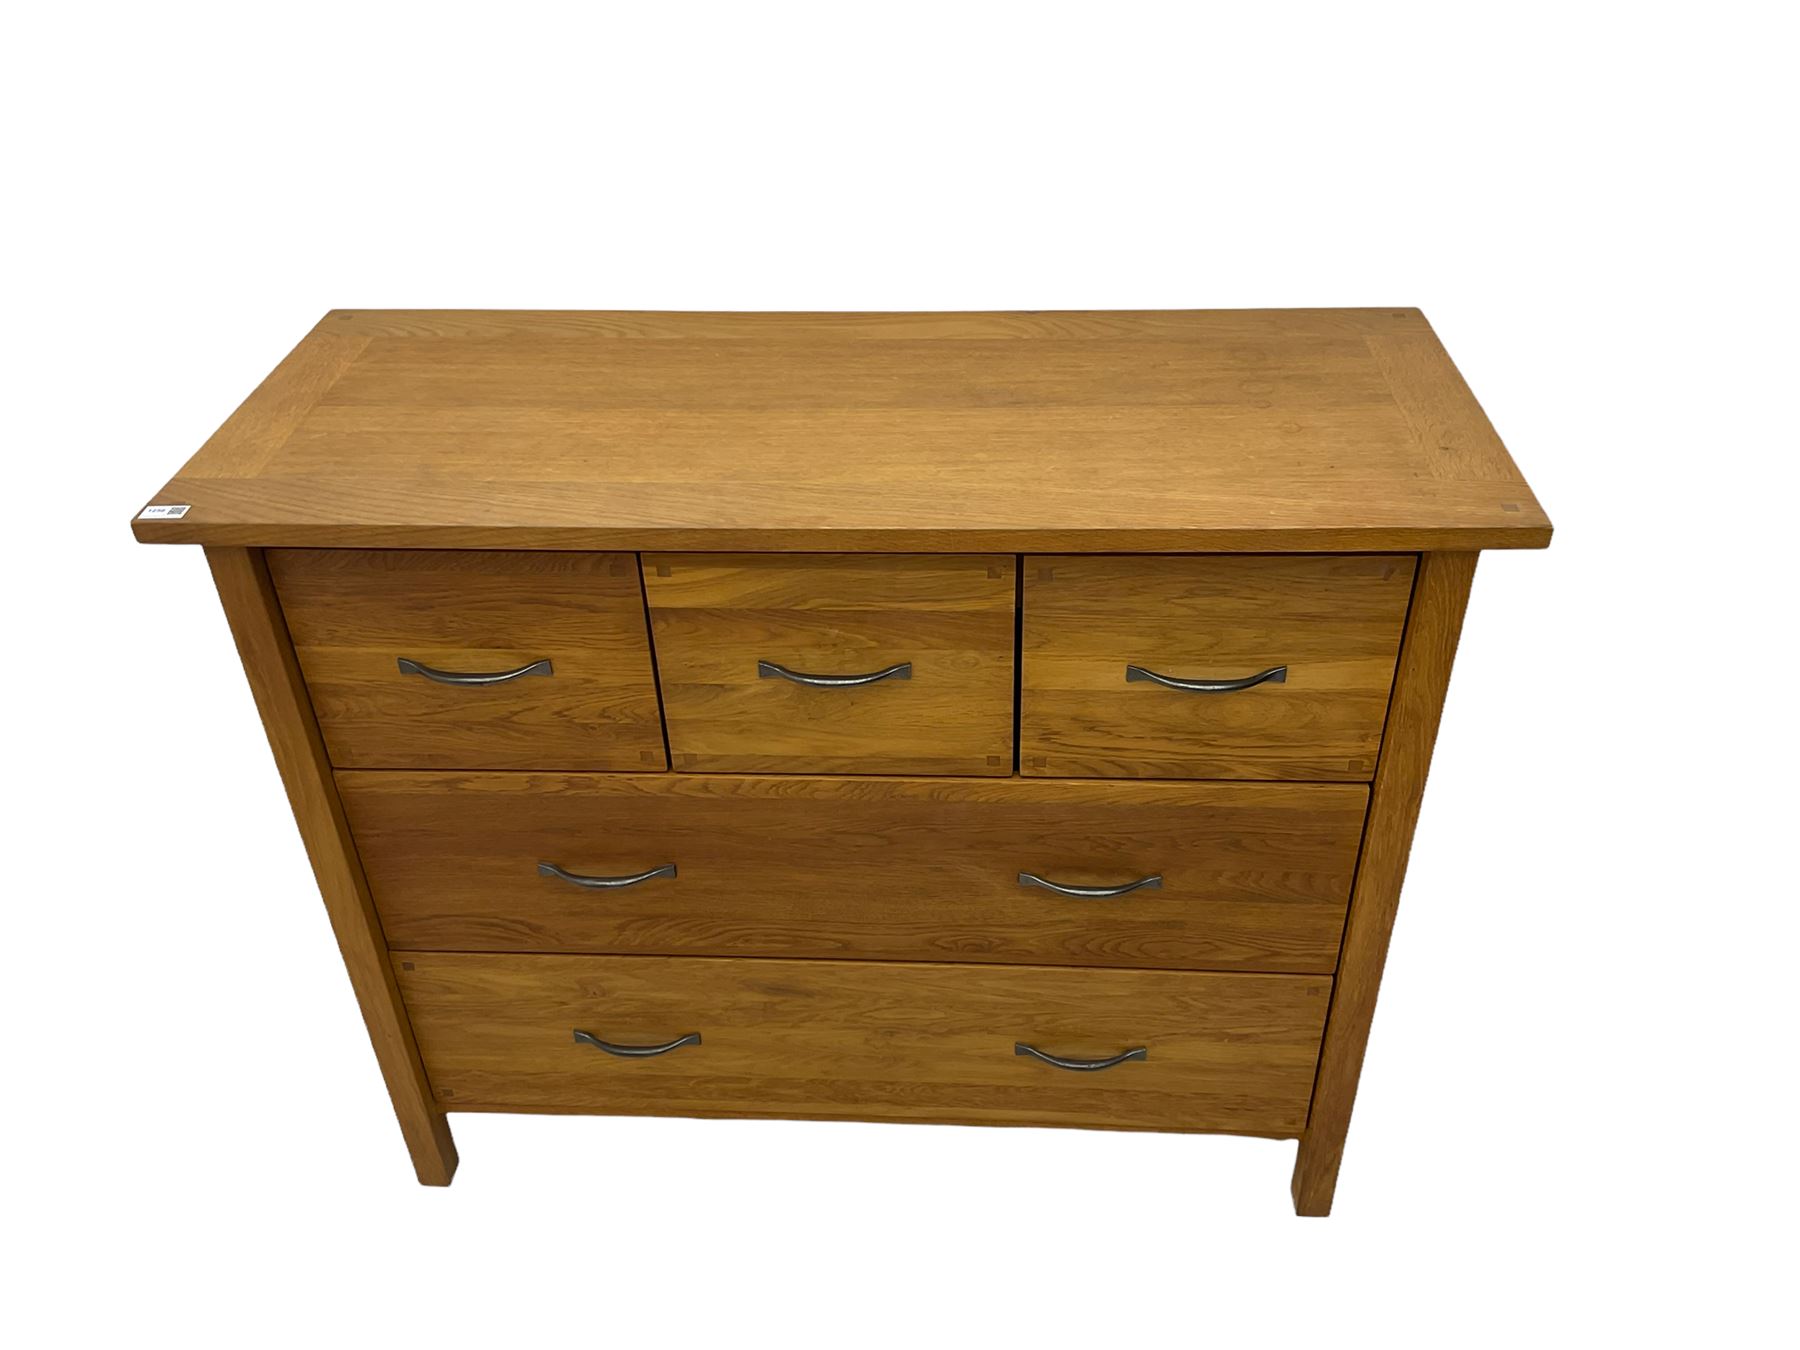 Light oak chest fitted with three small and two large drawers - Image 4 of 5